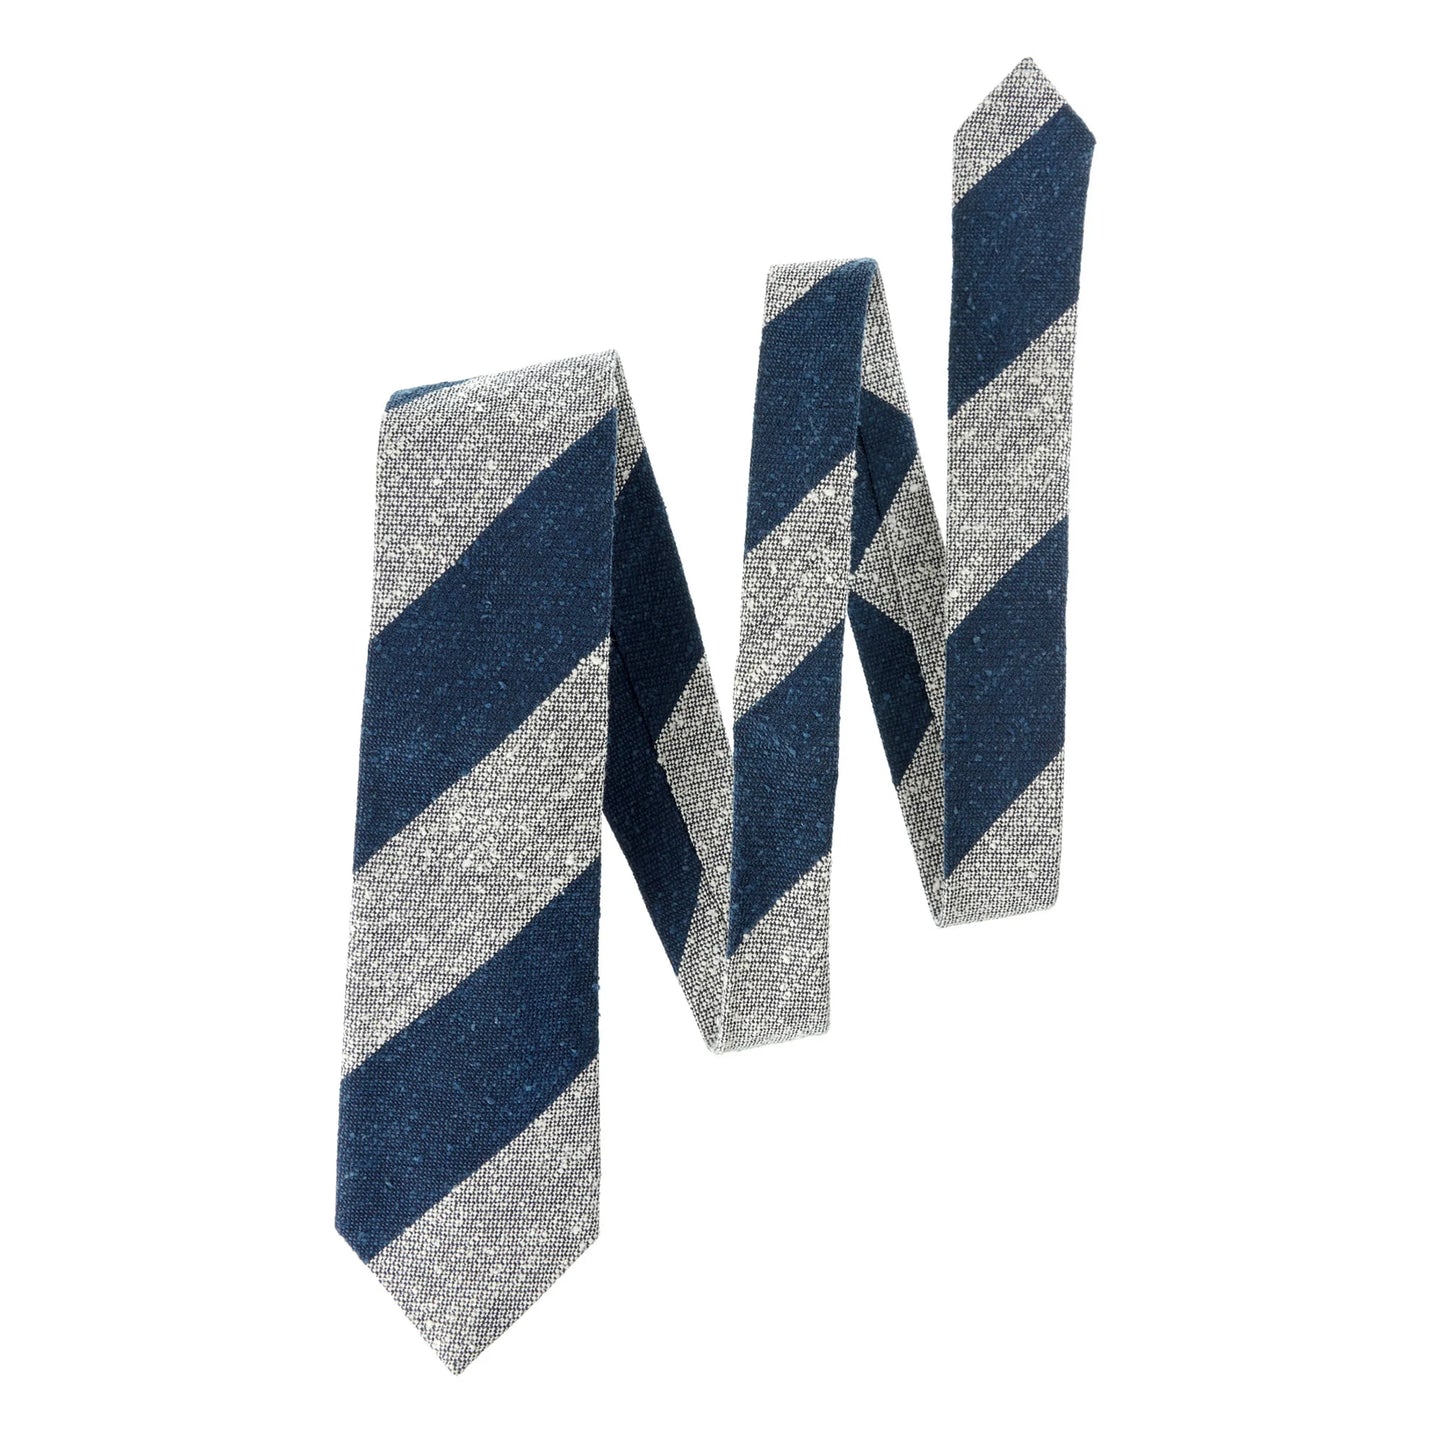 Regimental Textured Silk and Cotton-Blend Tie in Blue and White